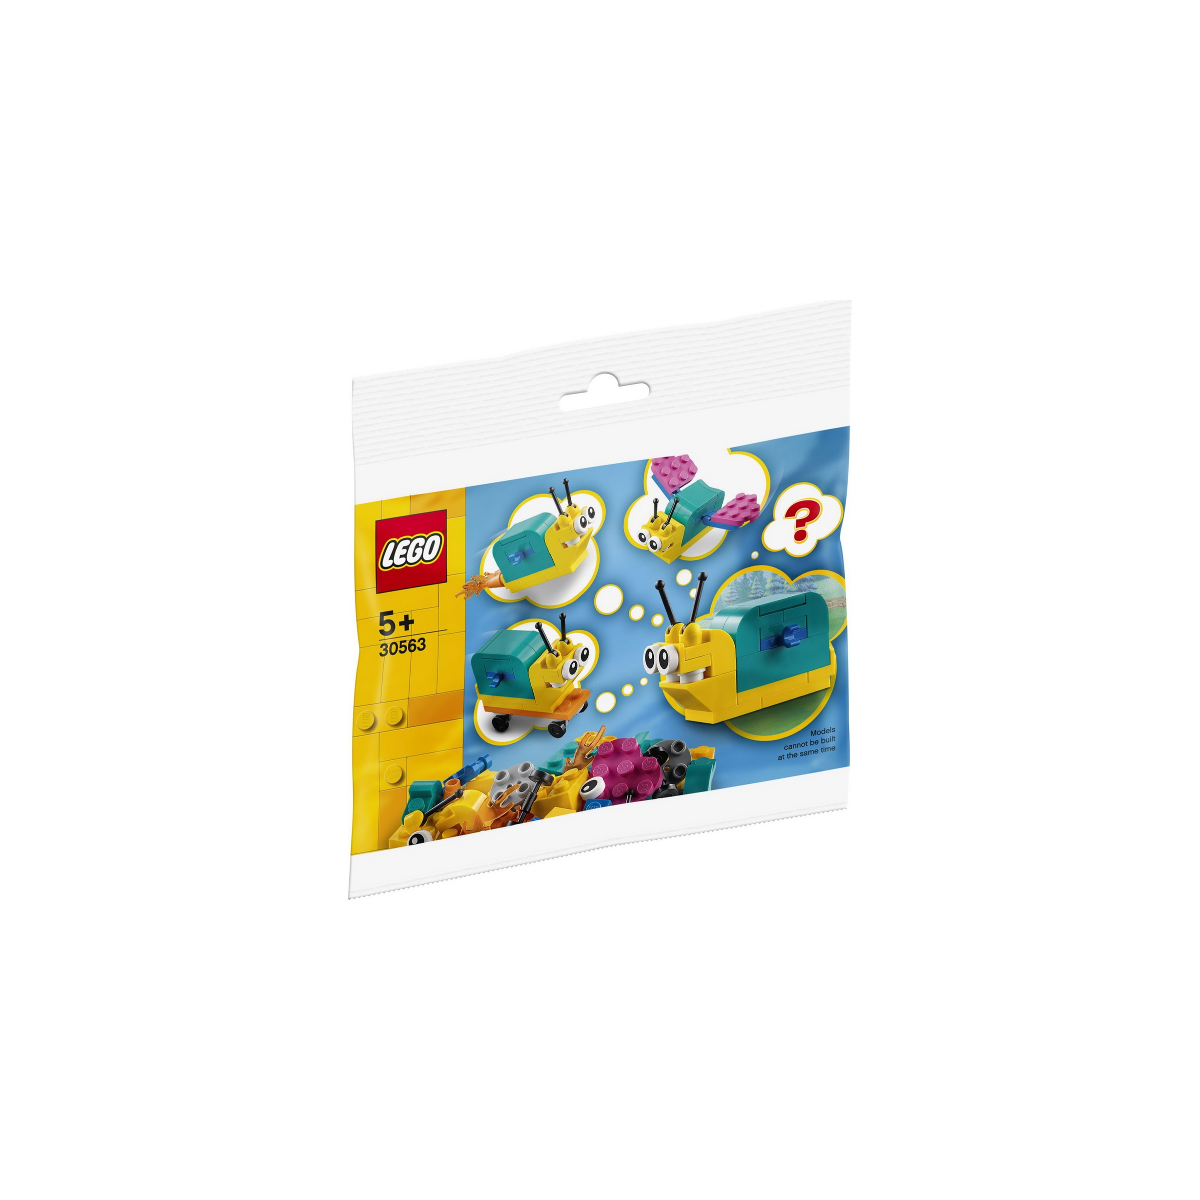 LEGO Build your own Snail polybag - 30563